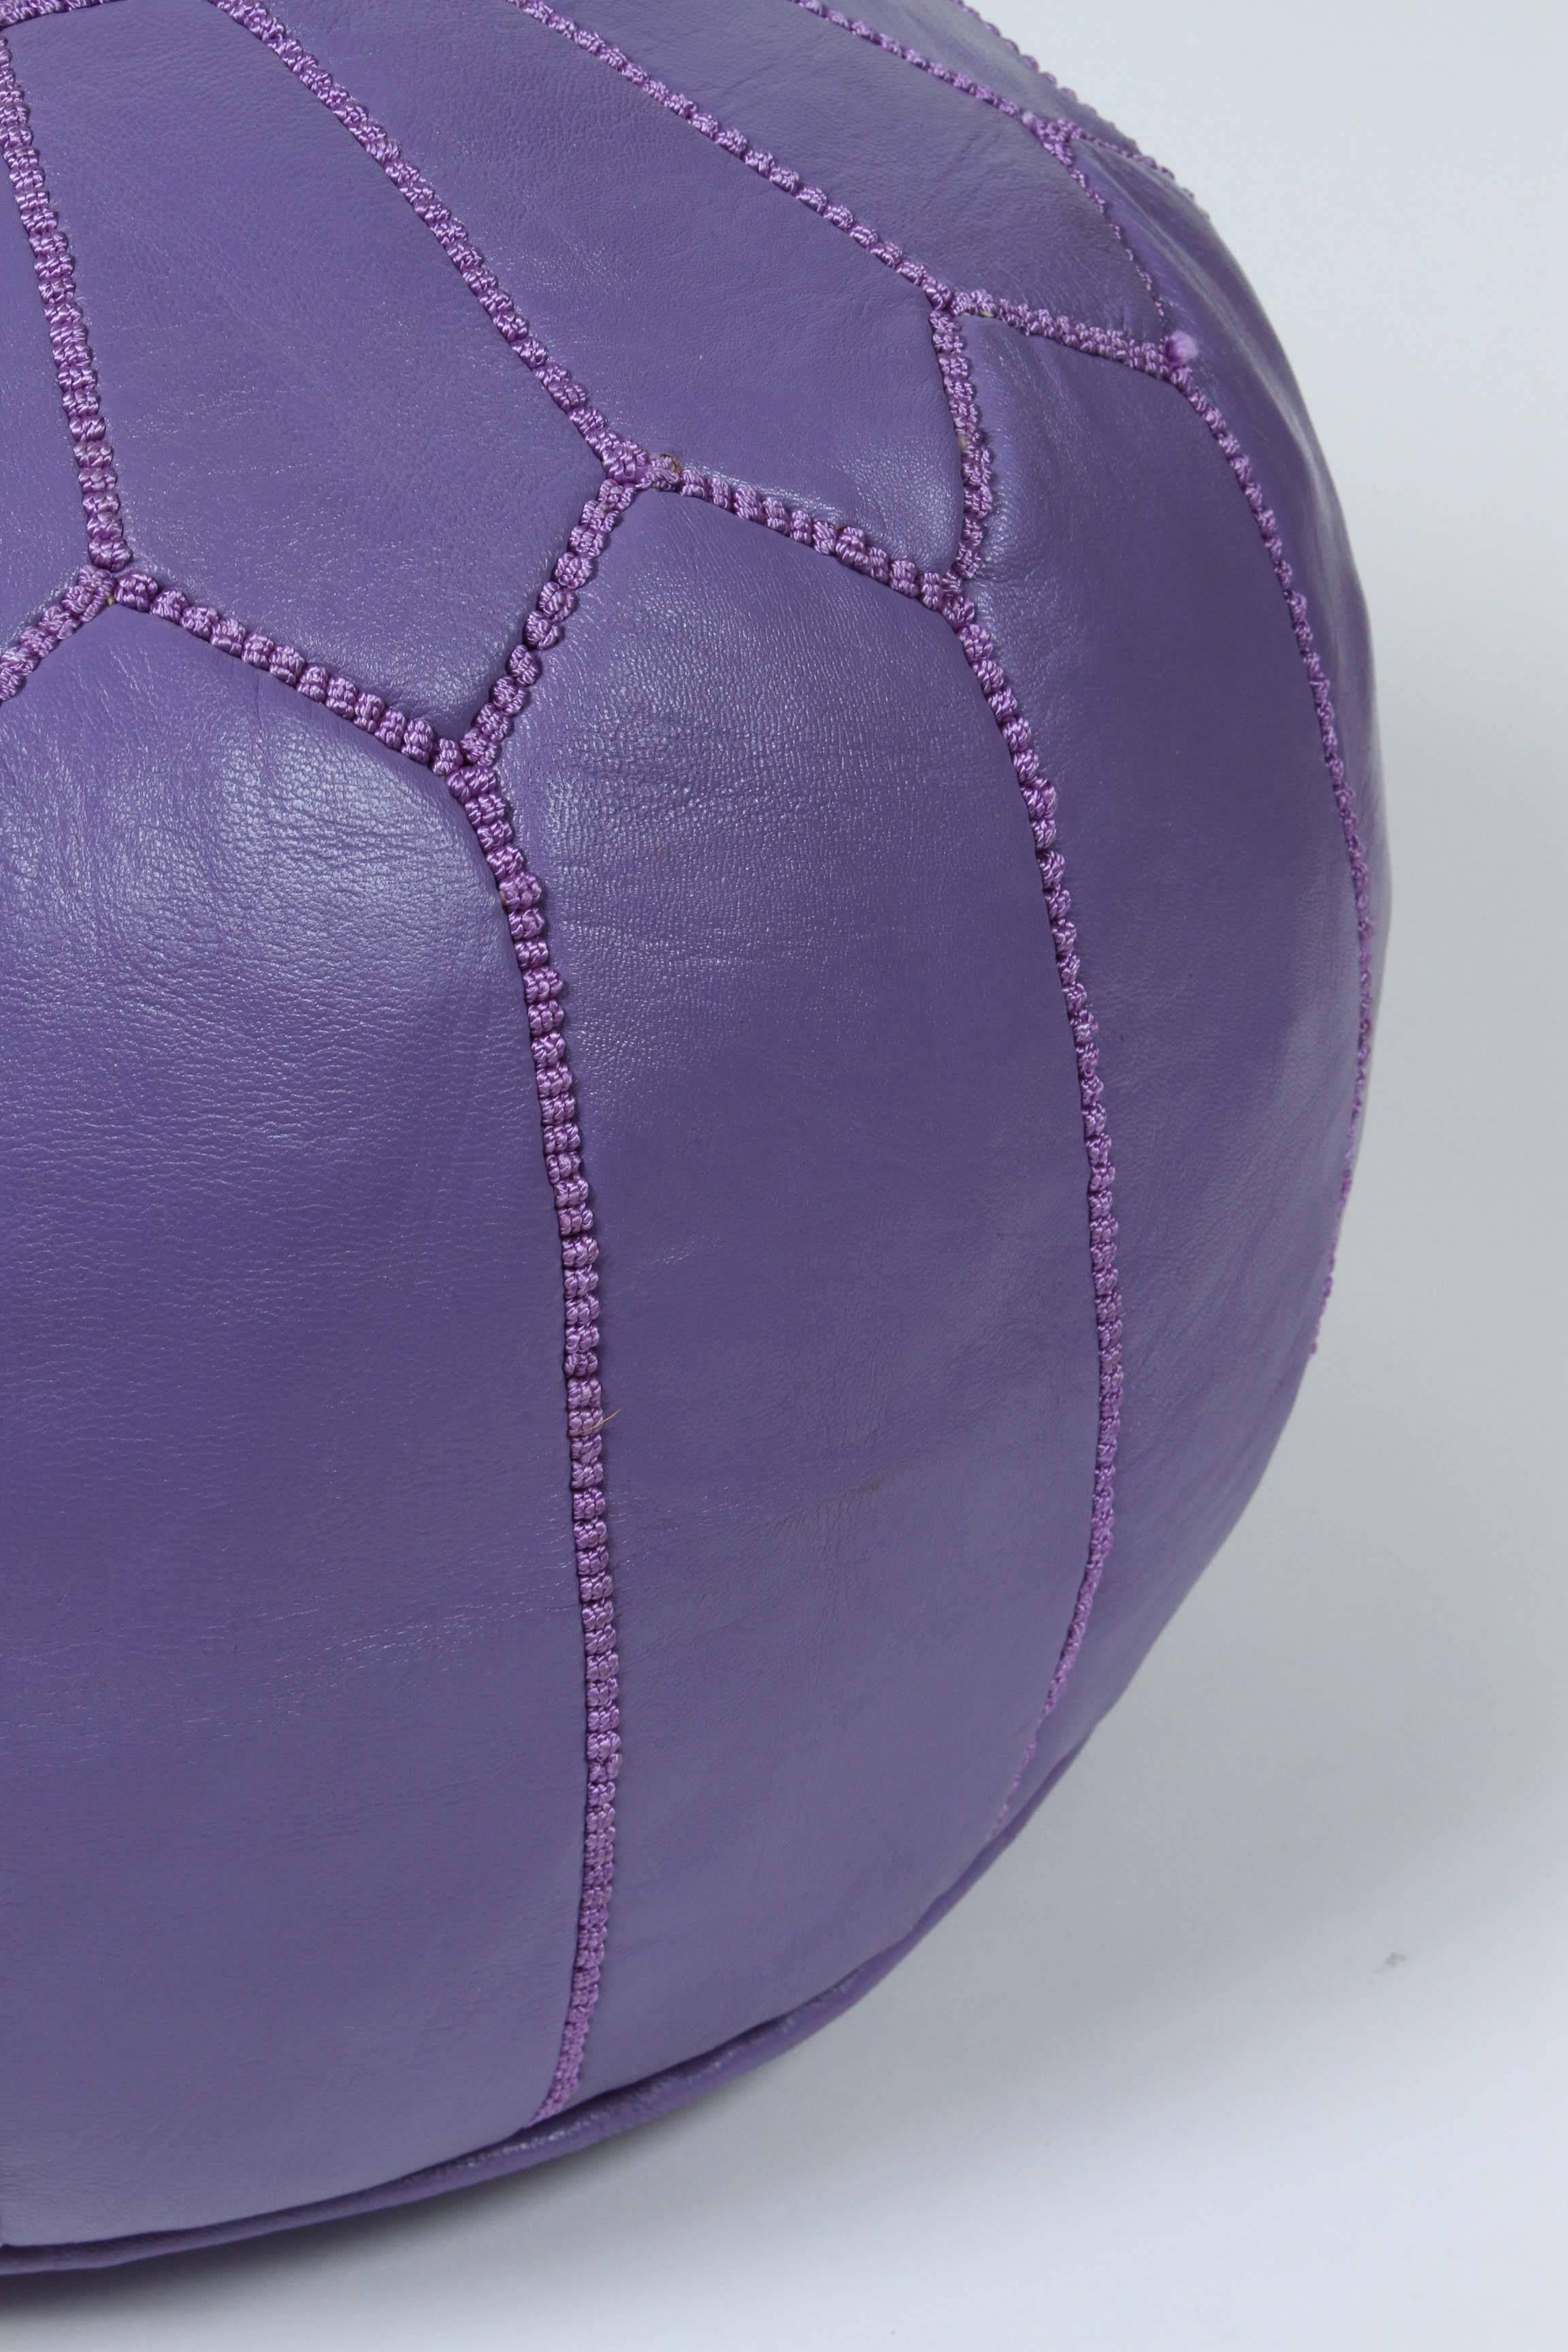 Moorish Hand-Tooled Moroccan Lavender Color Leather Pouf For Sale